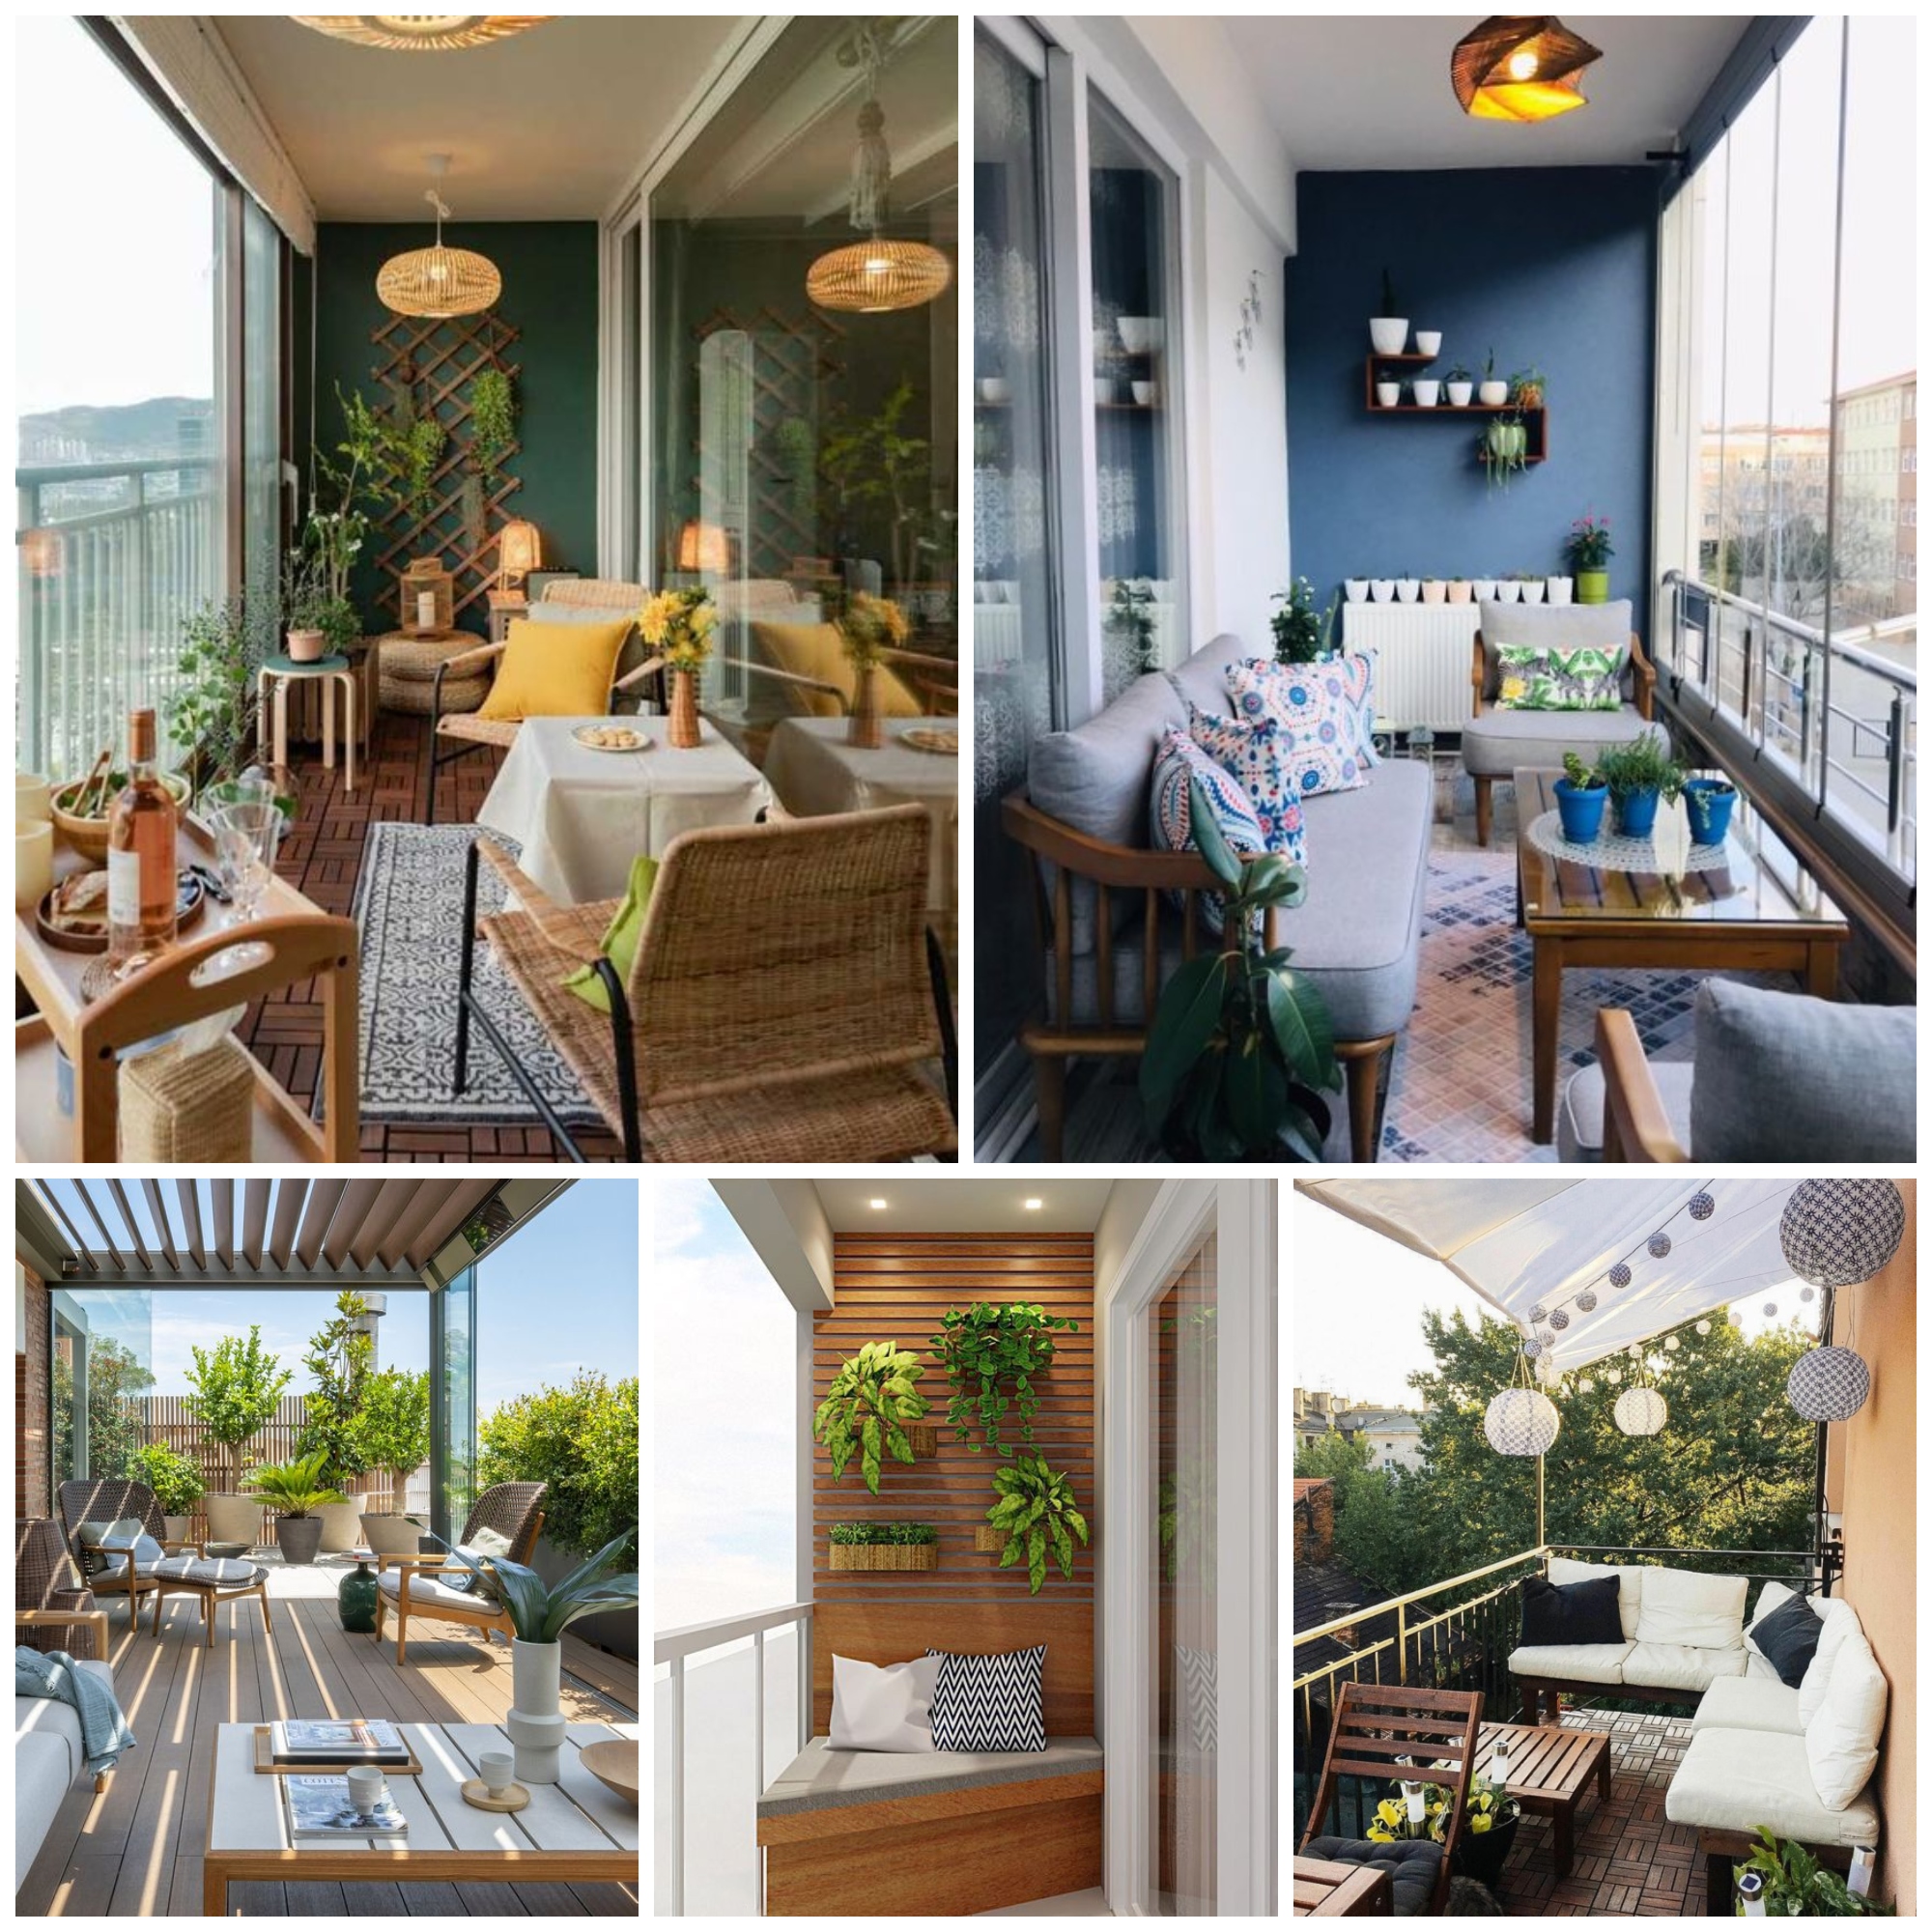 How to furnish a terrace on a budget without sacrificing design and comfort